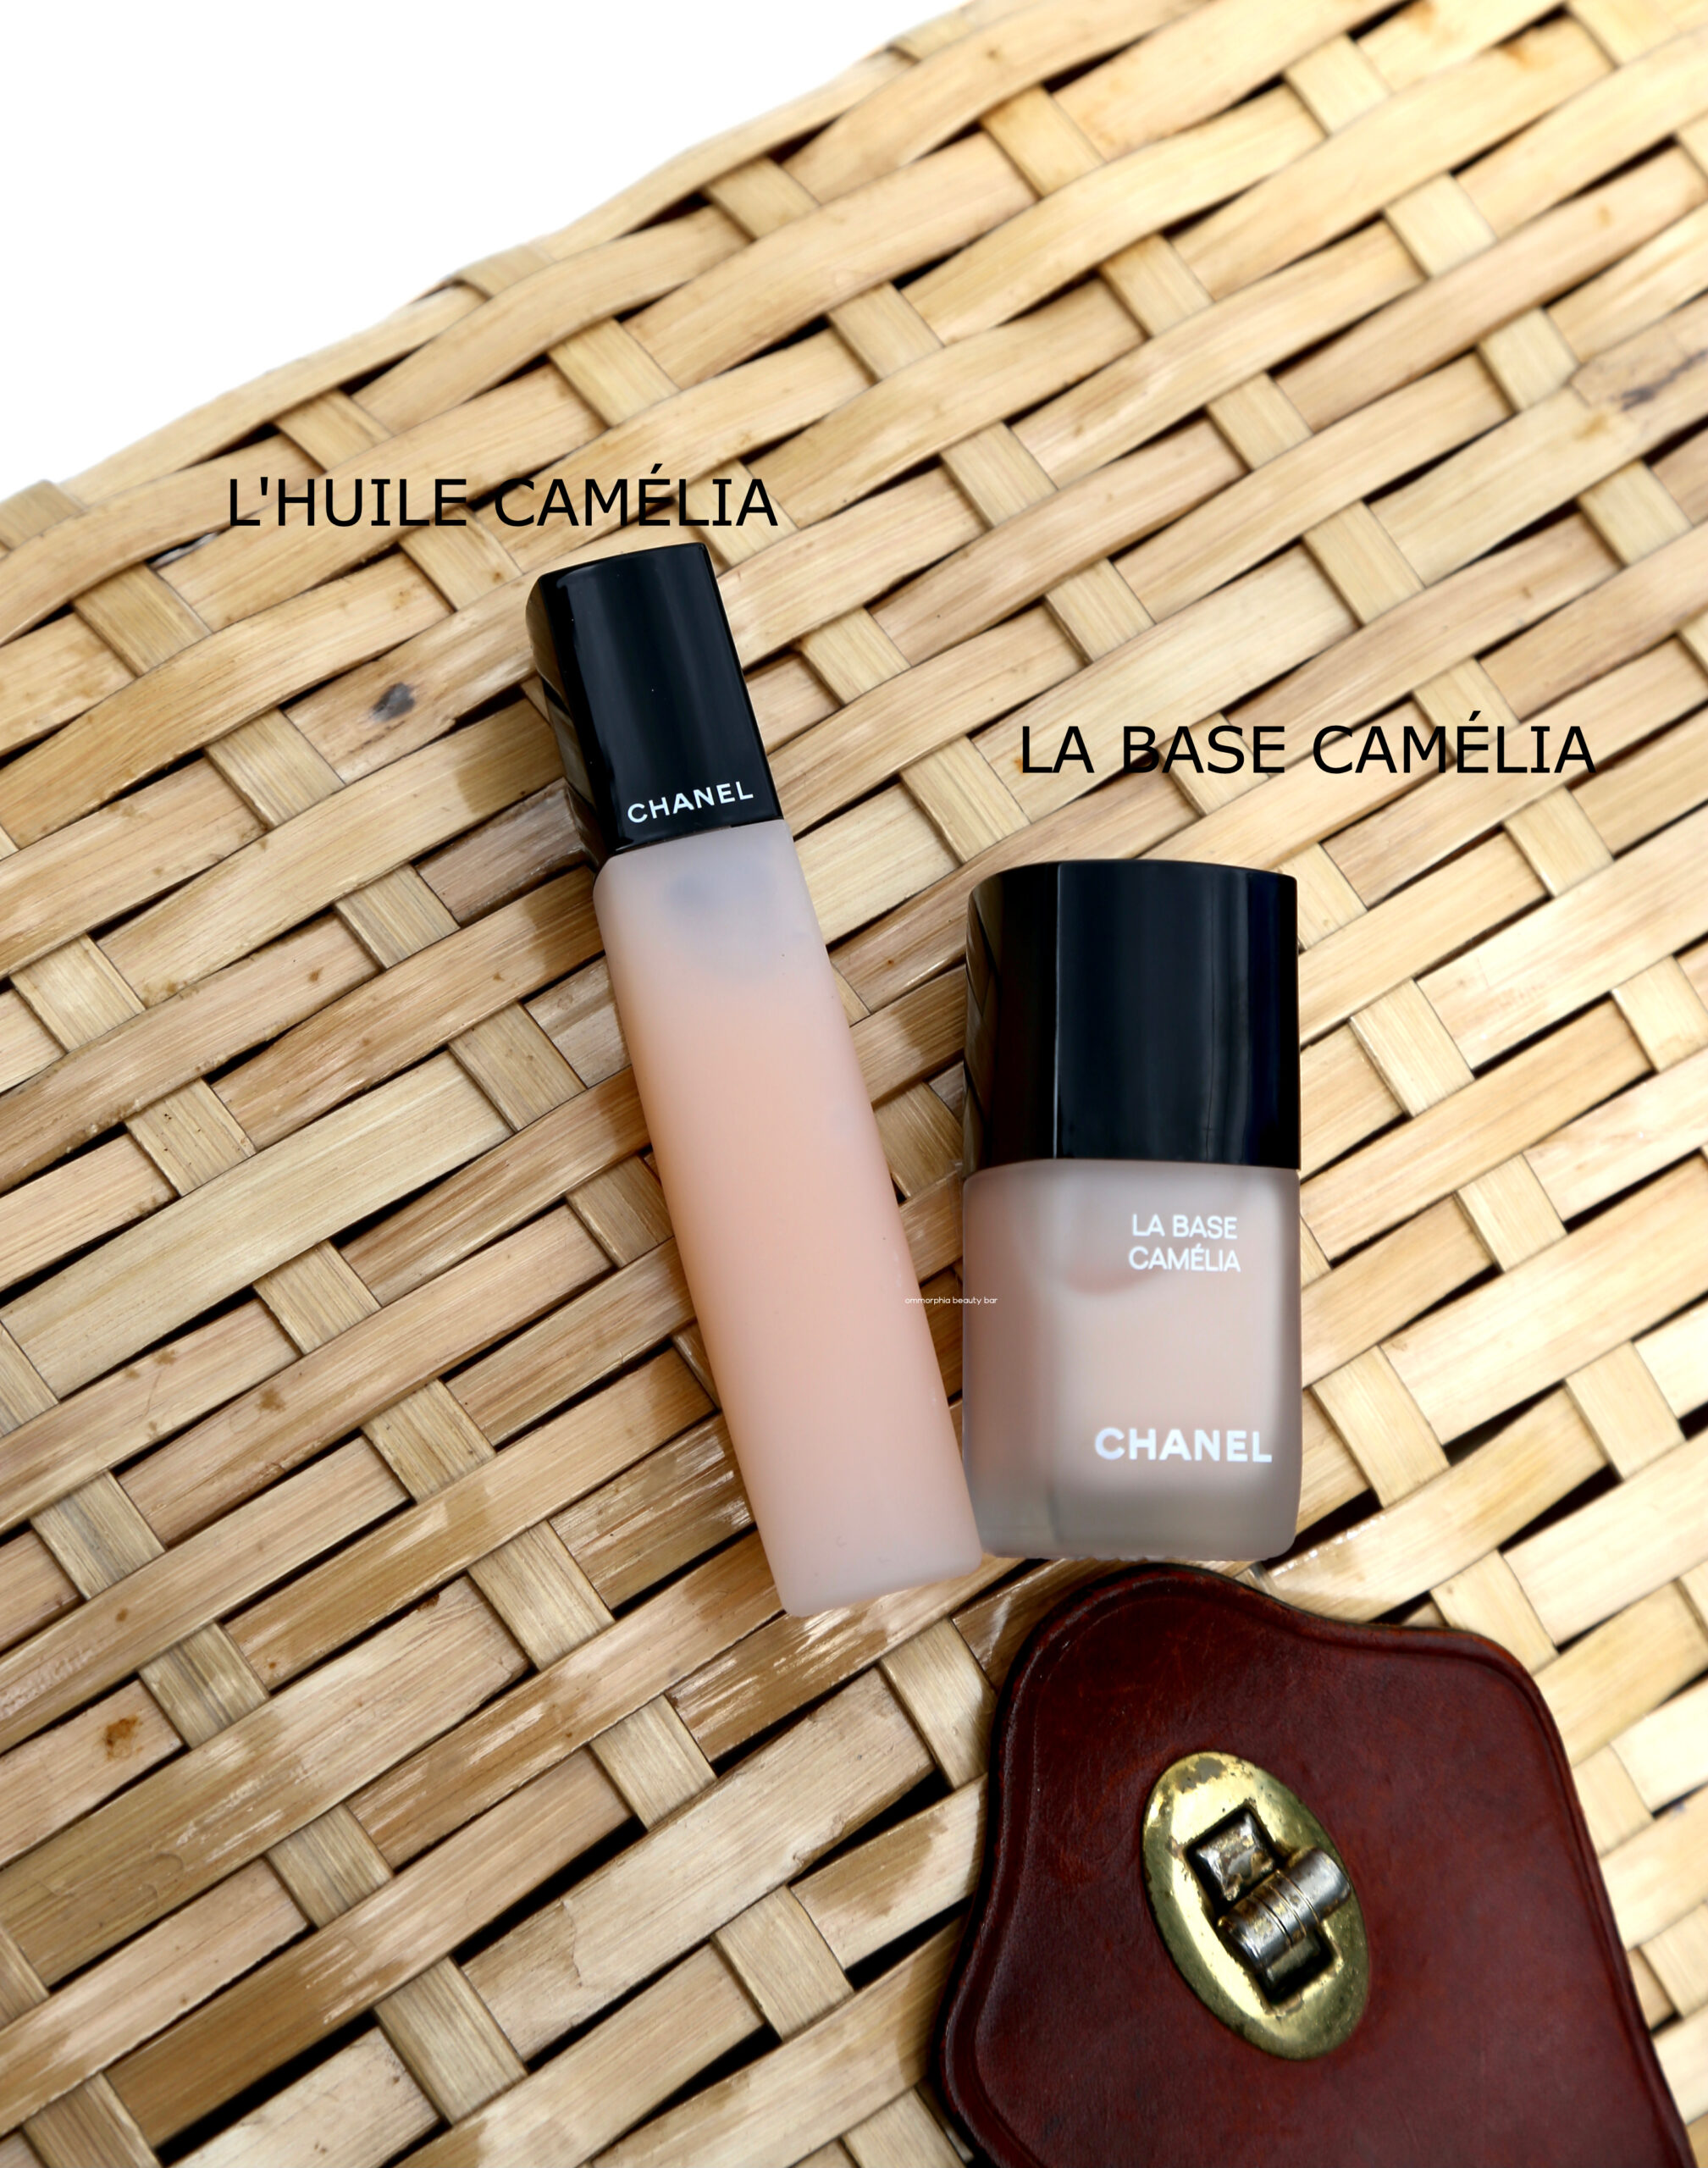 CHANEL · Le Vernis Summer 2022 & New Nail Care